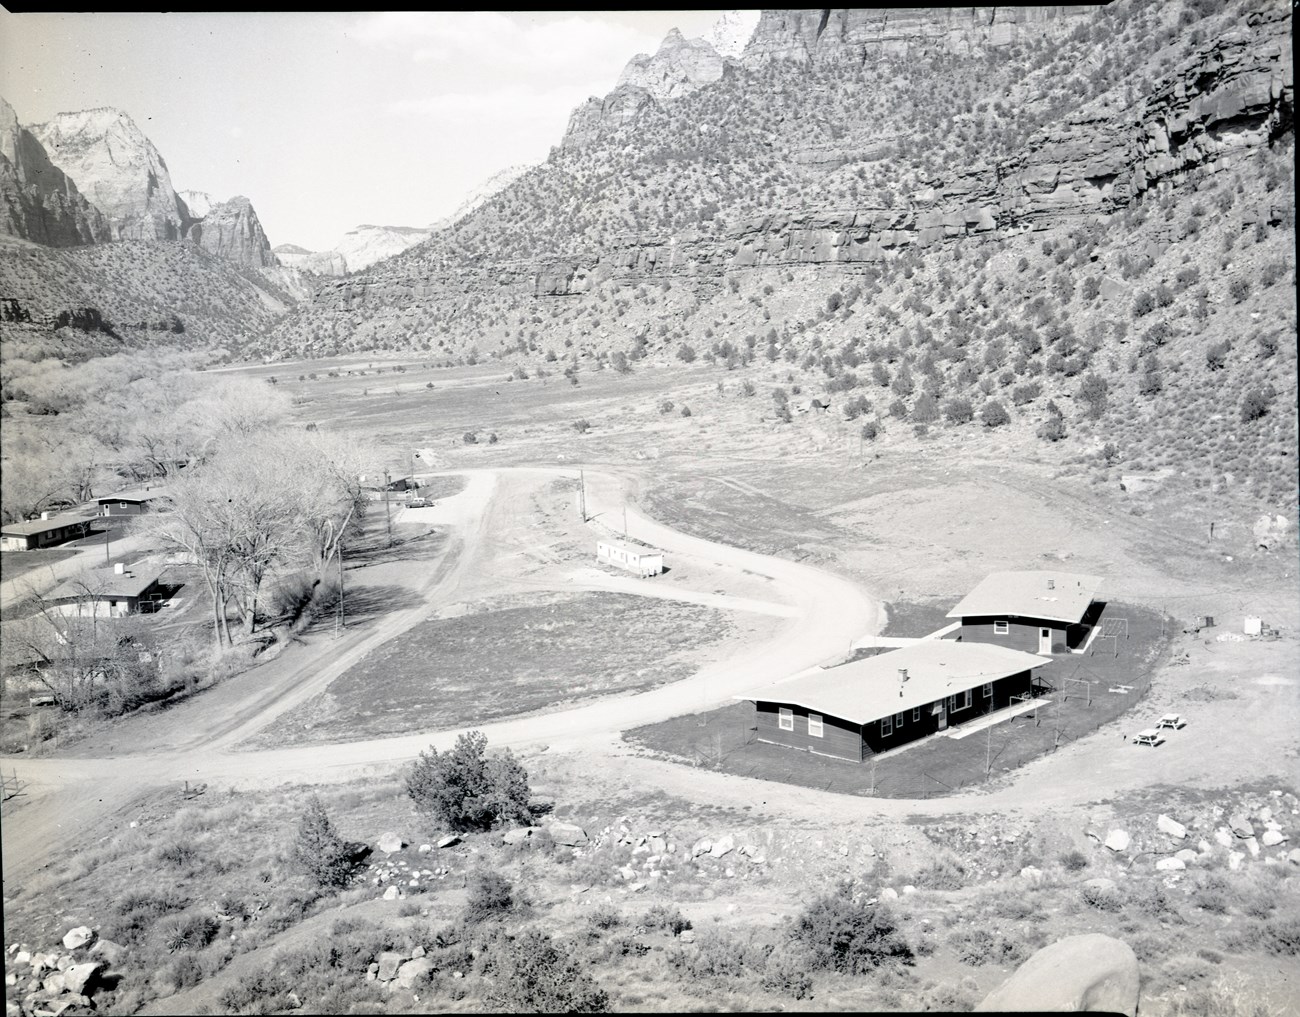 ZION 7832: After the end of the CCC program, the area where Camp NP-4 stood was leveled and turned into the Watchman residential area for National Park Service staff, pictured in this 1966 photo.